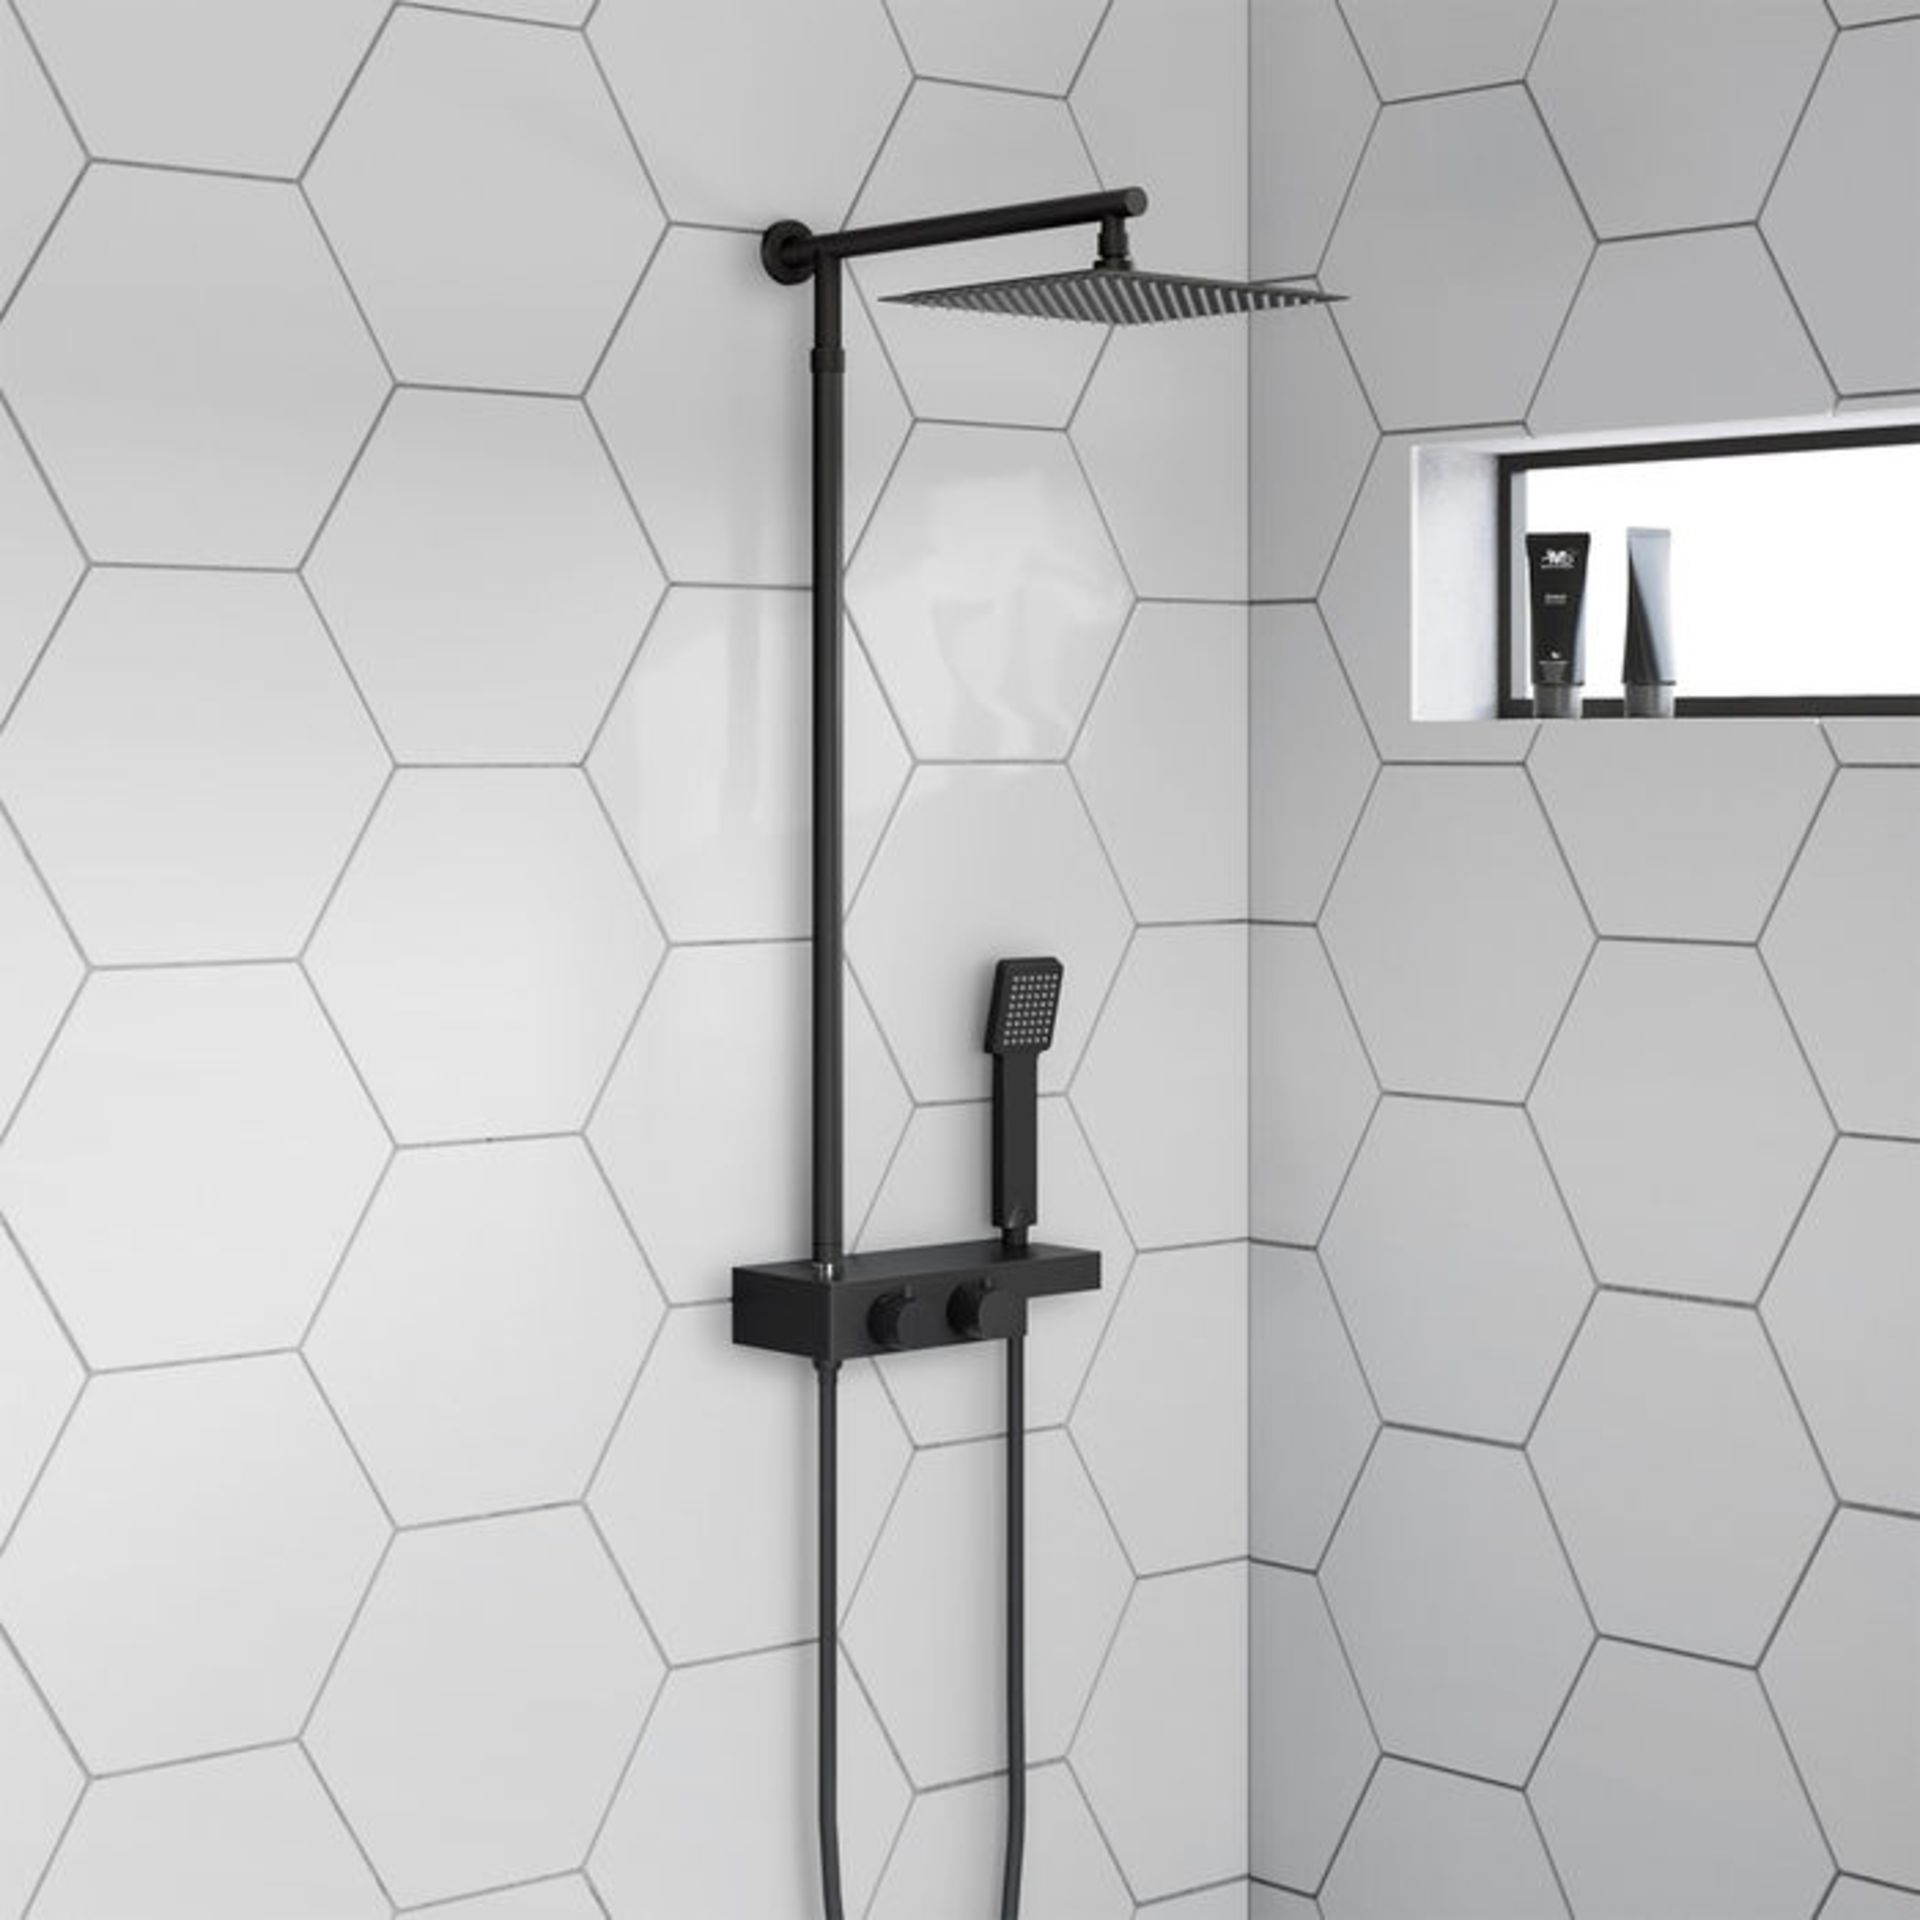 NEW & BOXDED Matte Black Square Thermostatic Mixer Shower Kit & Shelf. RRP £599.99.SP510... - Image 2 of 3